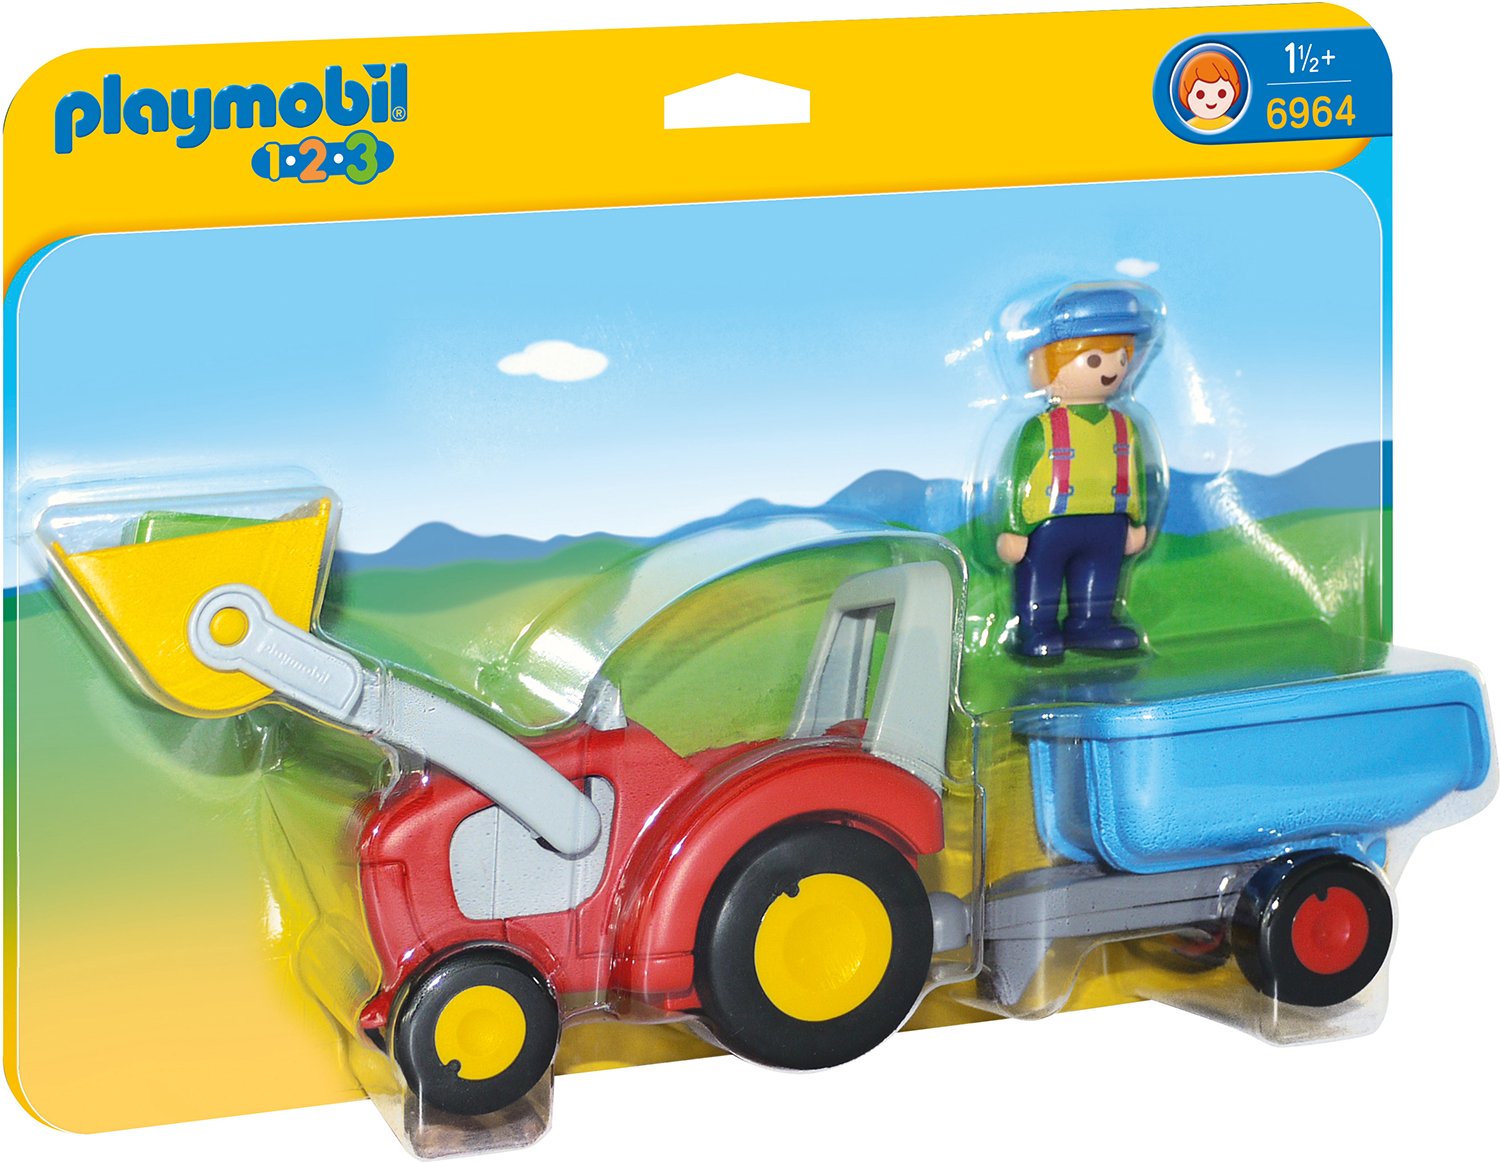 Playmobil Tractor With Shovel And Trailer